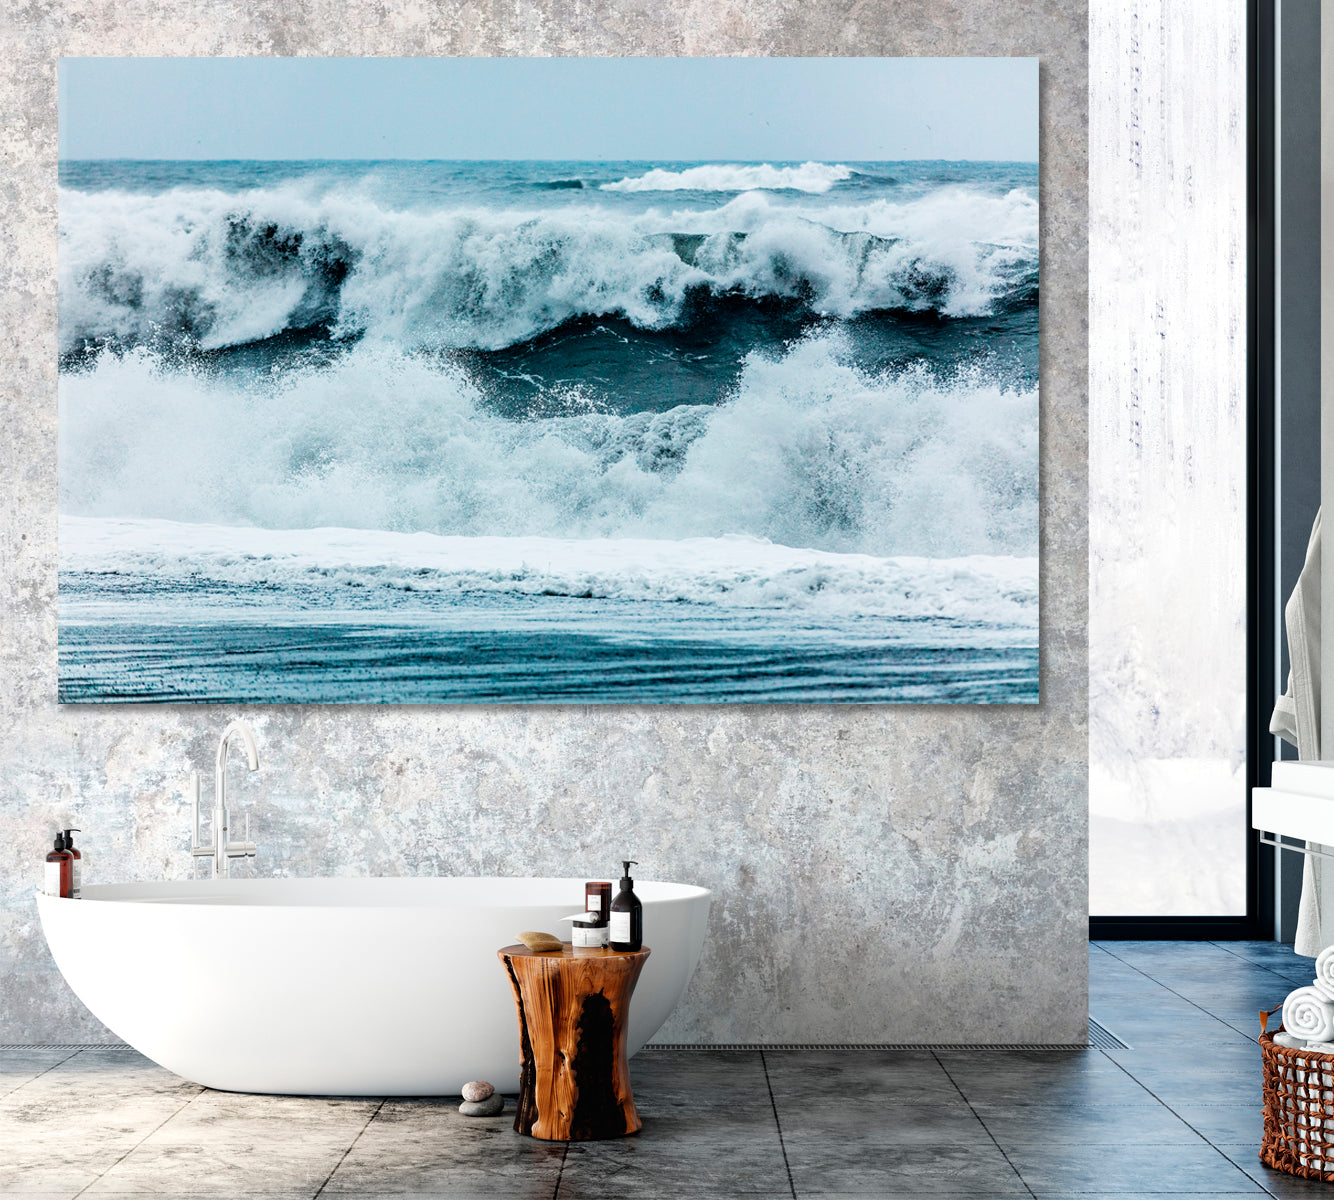 Stormy Waves on Vik Beach Iceland Canvas Print ArtLexy 1 Panel 24"x16" inches 